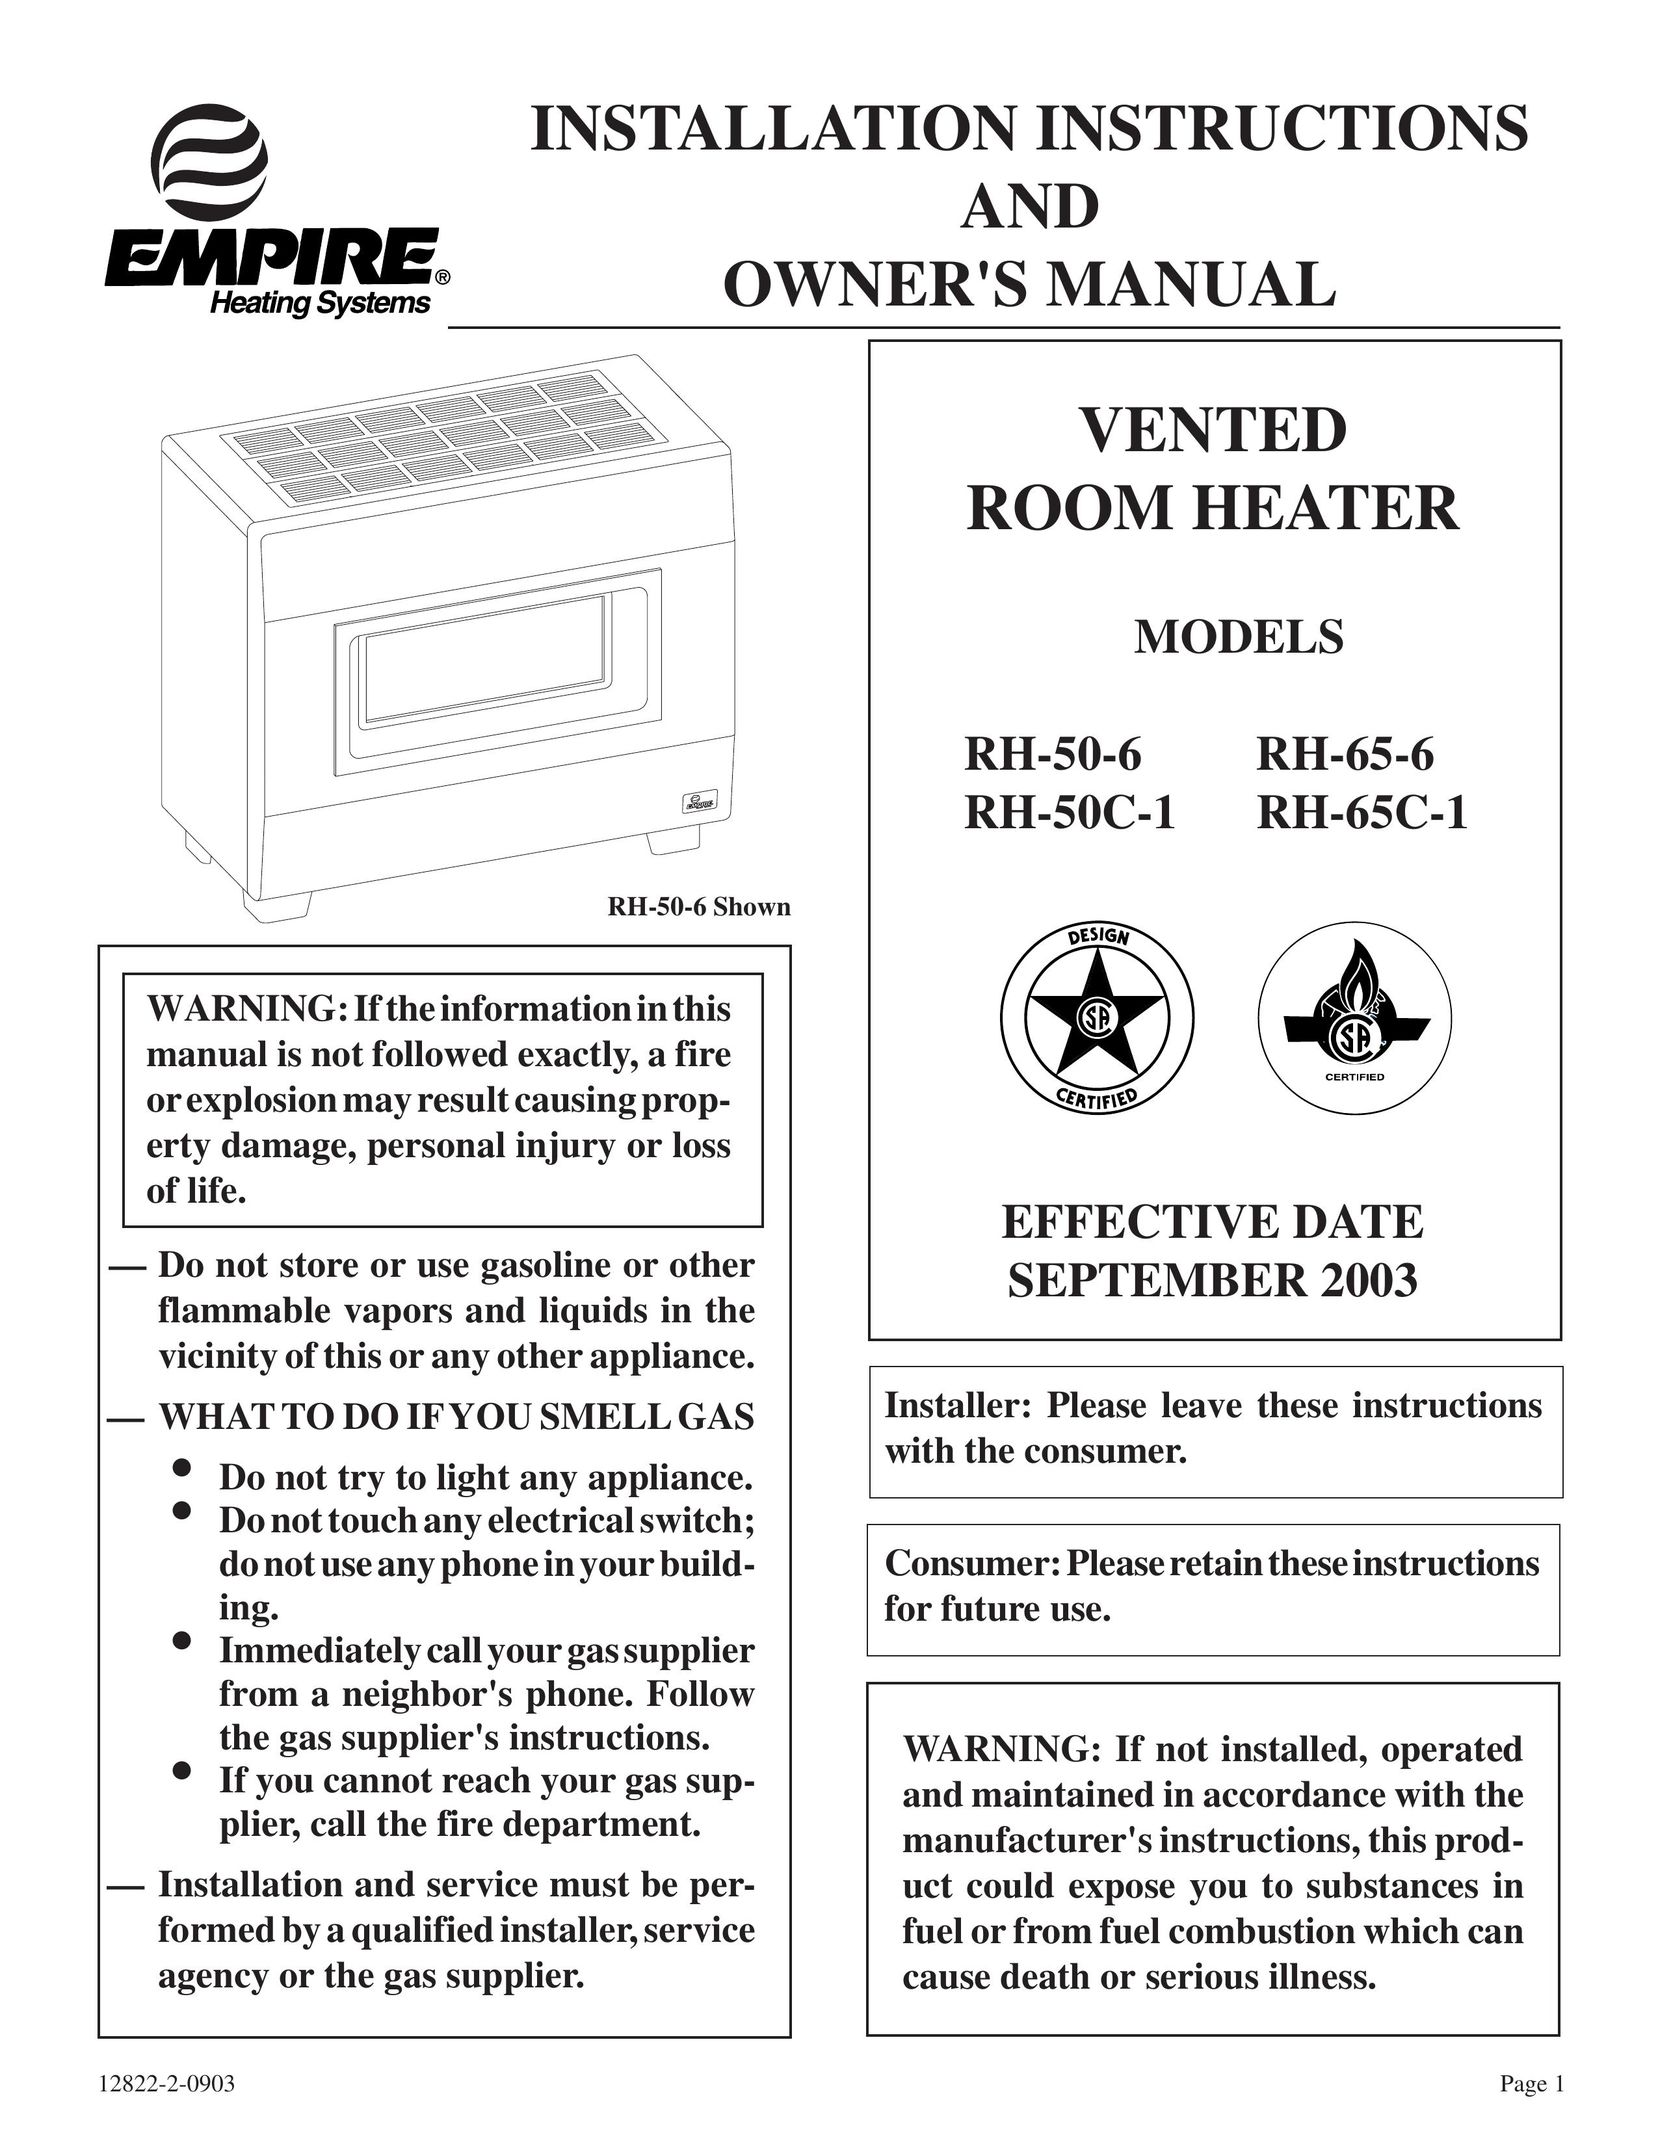 Empire Comfort Systems RH-50C-1 Electric Heater User Manual